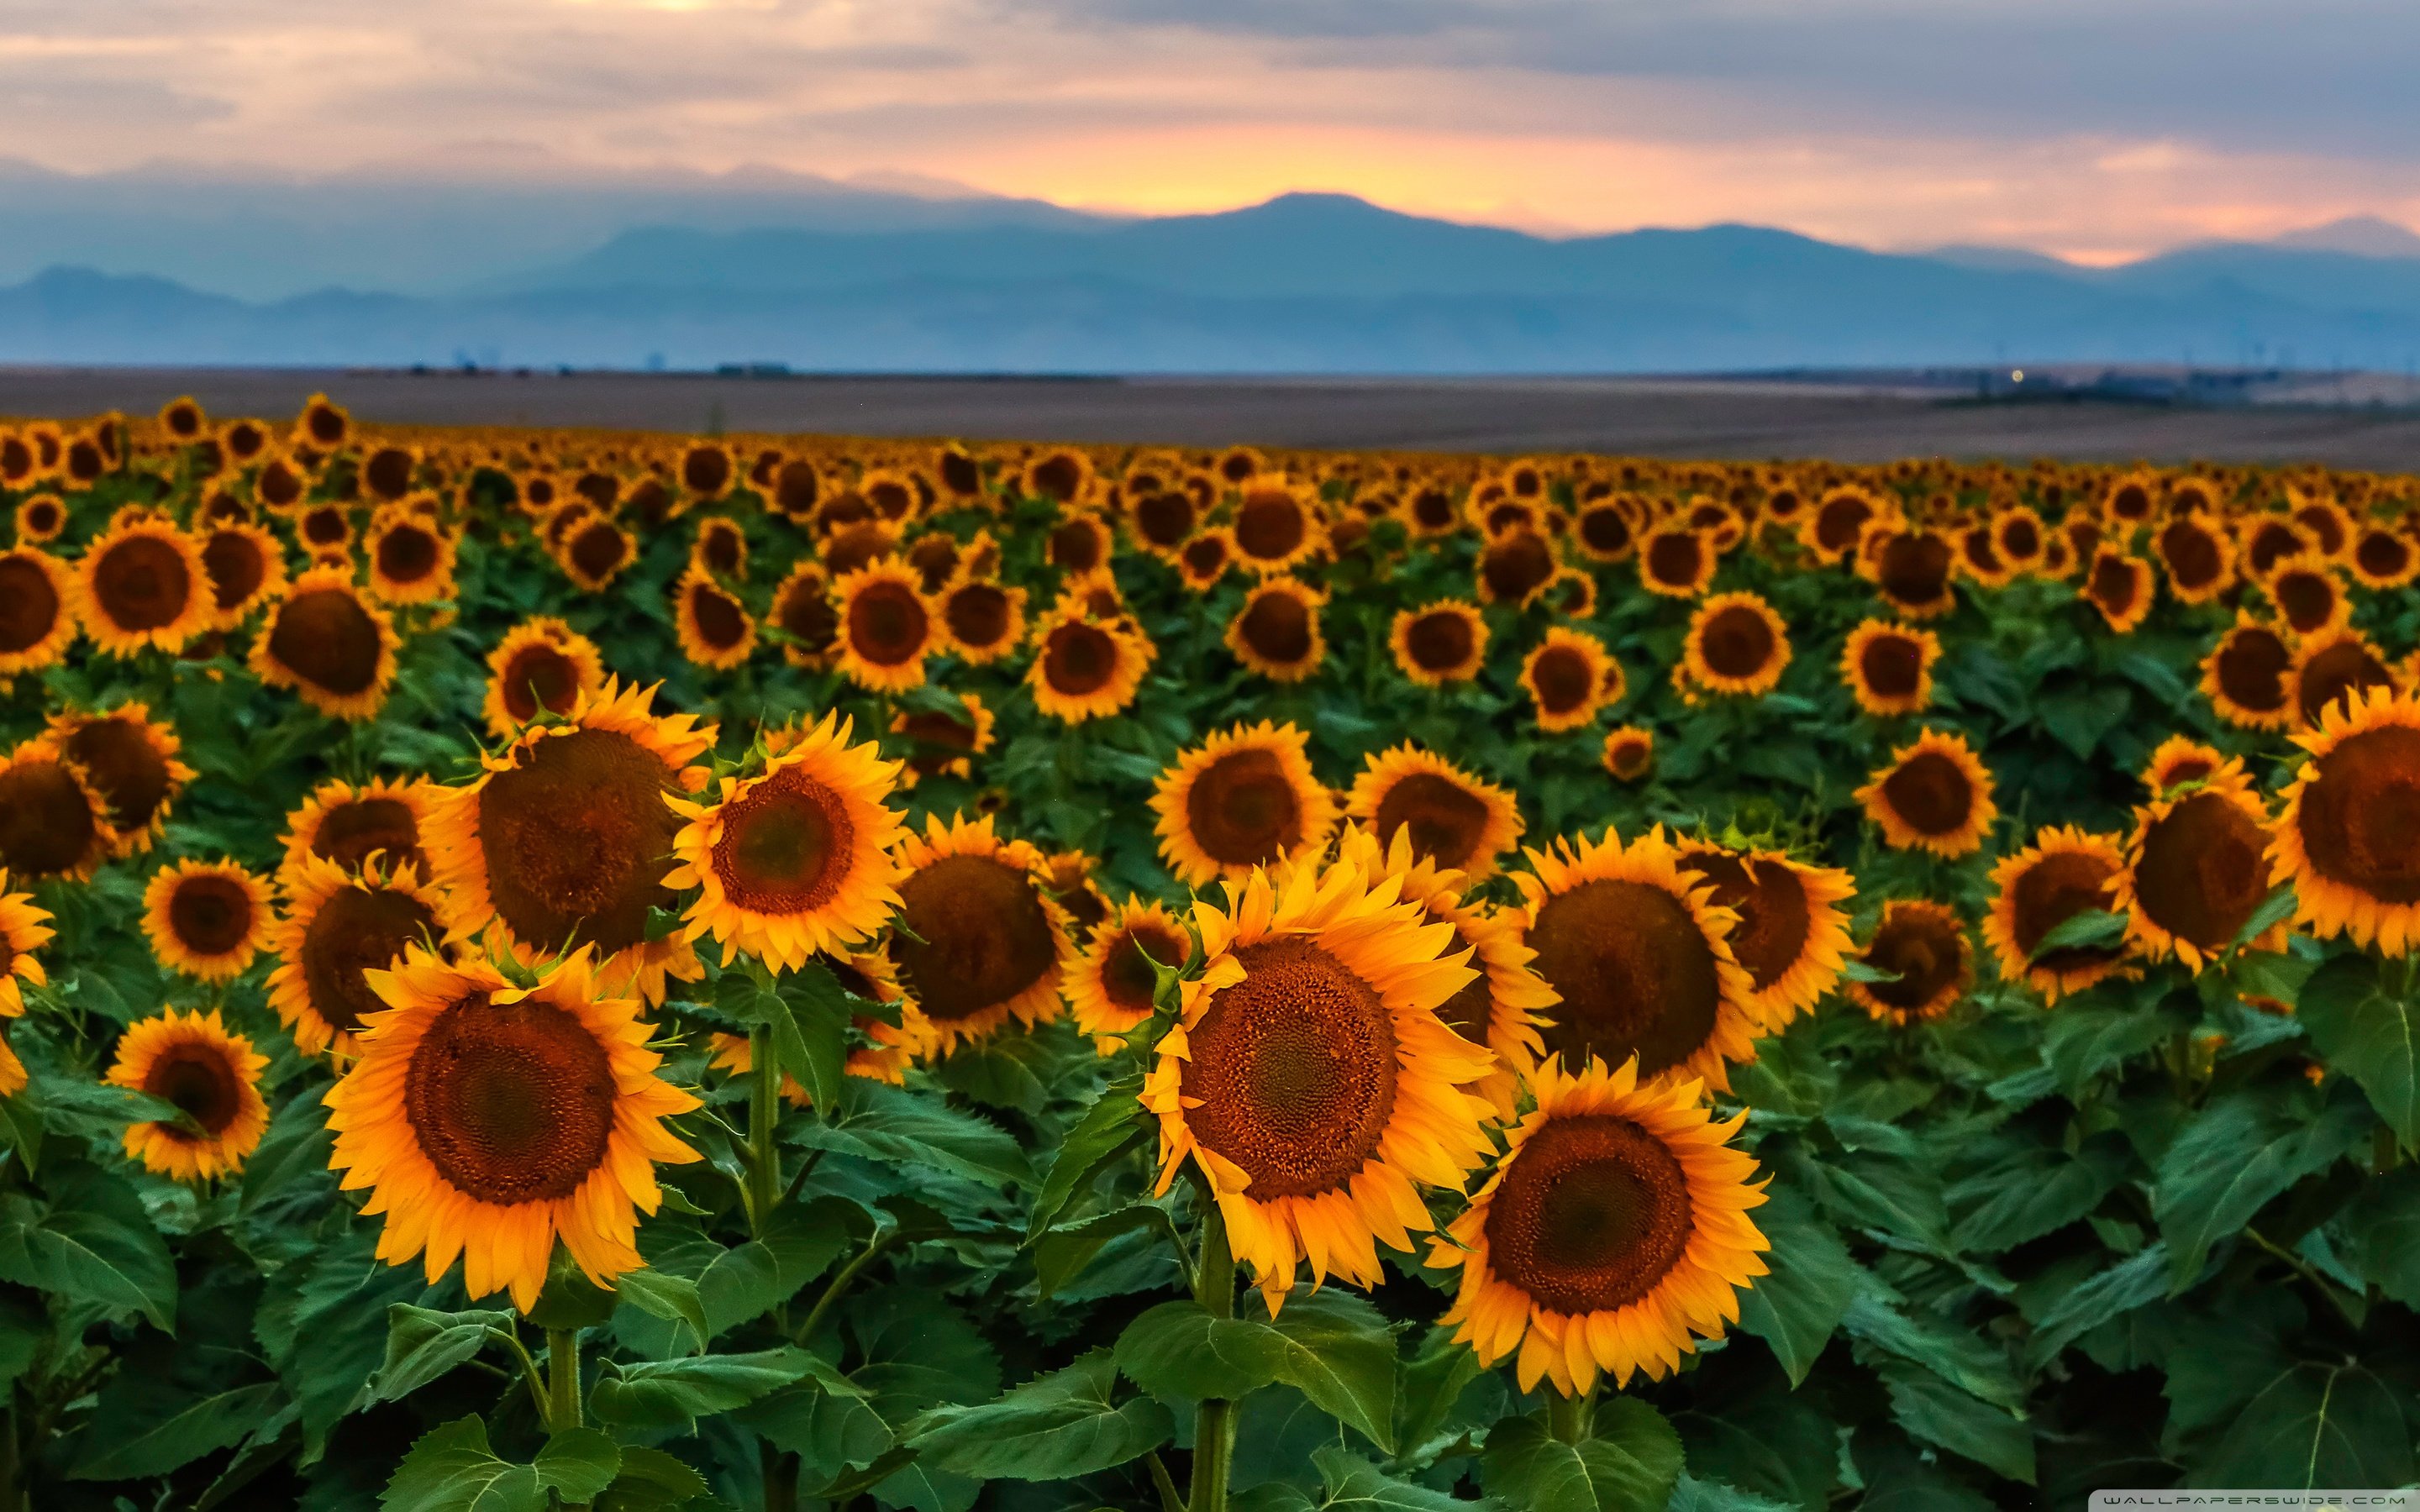 sunflower sunset wallpapers wallpaper cave on sunflowers at sunset wallpapers